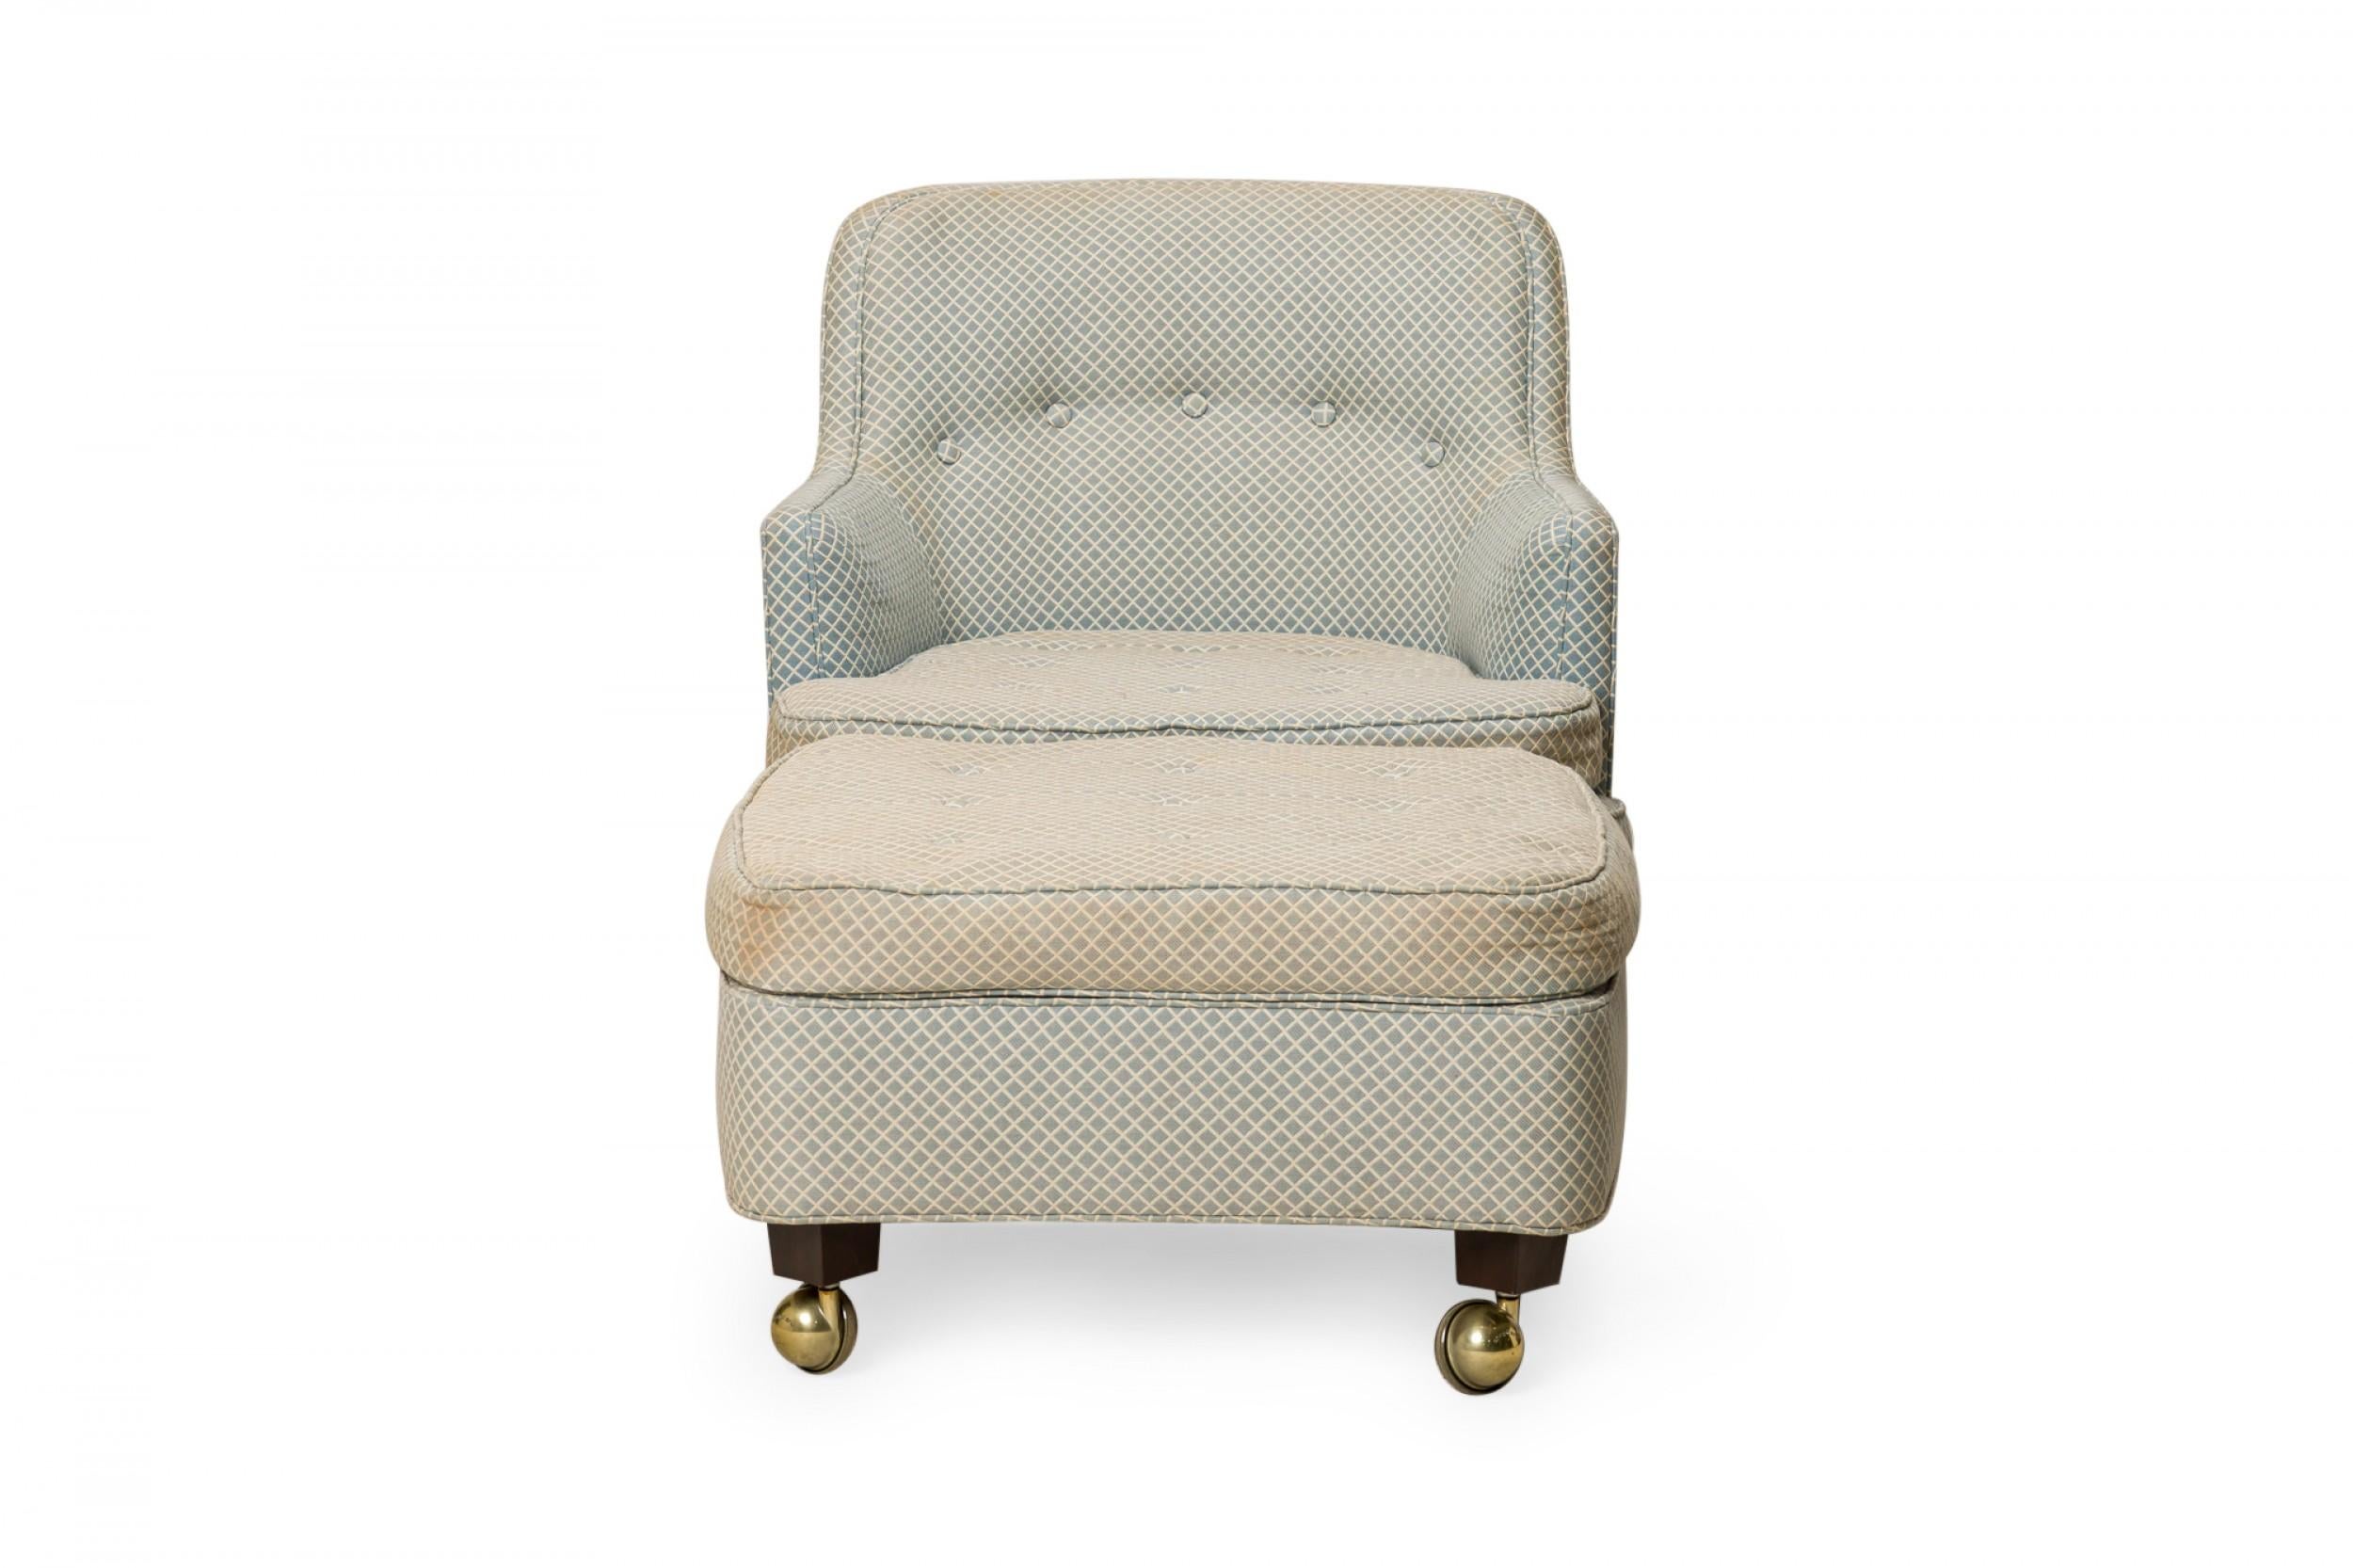 American Mid-Century rolling boudoir / lounge armchair and matching ottoman, upholstered in a light blue and white diamond patterned fabric with button tufted back detail, both resting on short walnut legs ending in brass ball casters.(EDWARD J